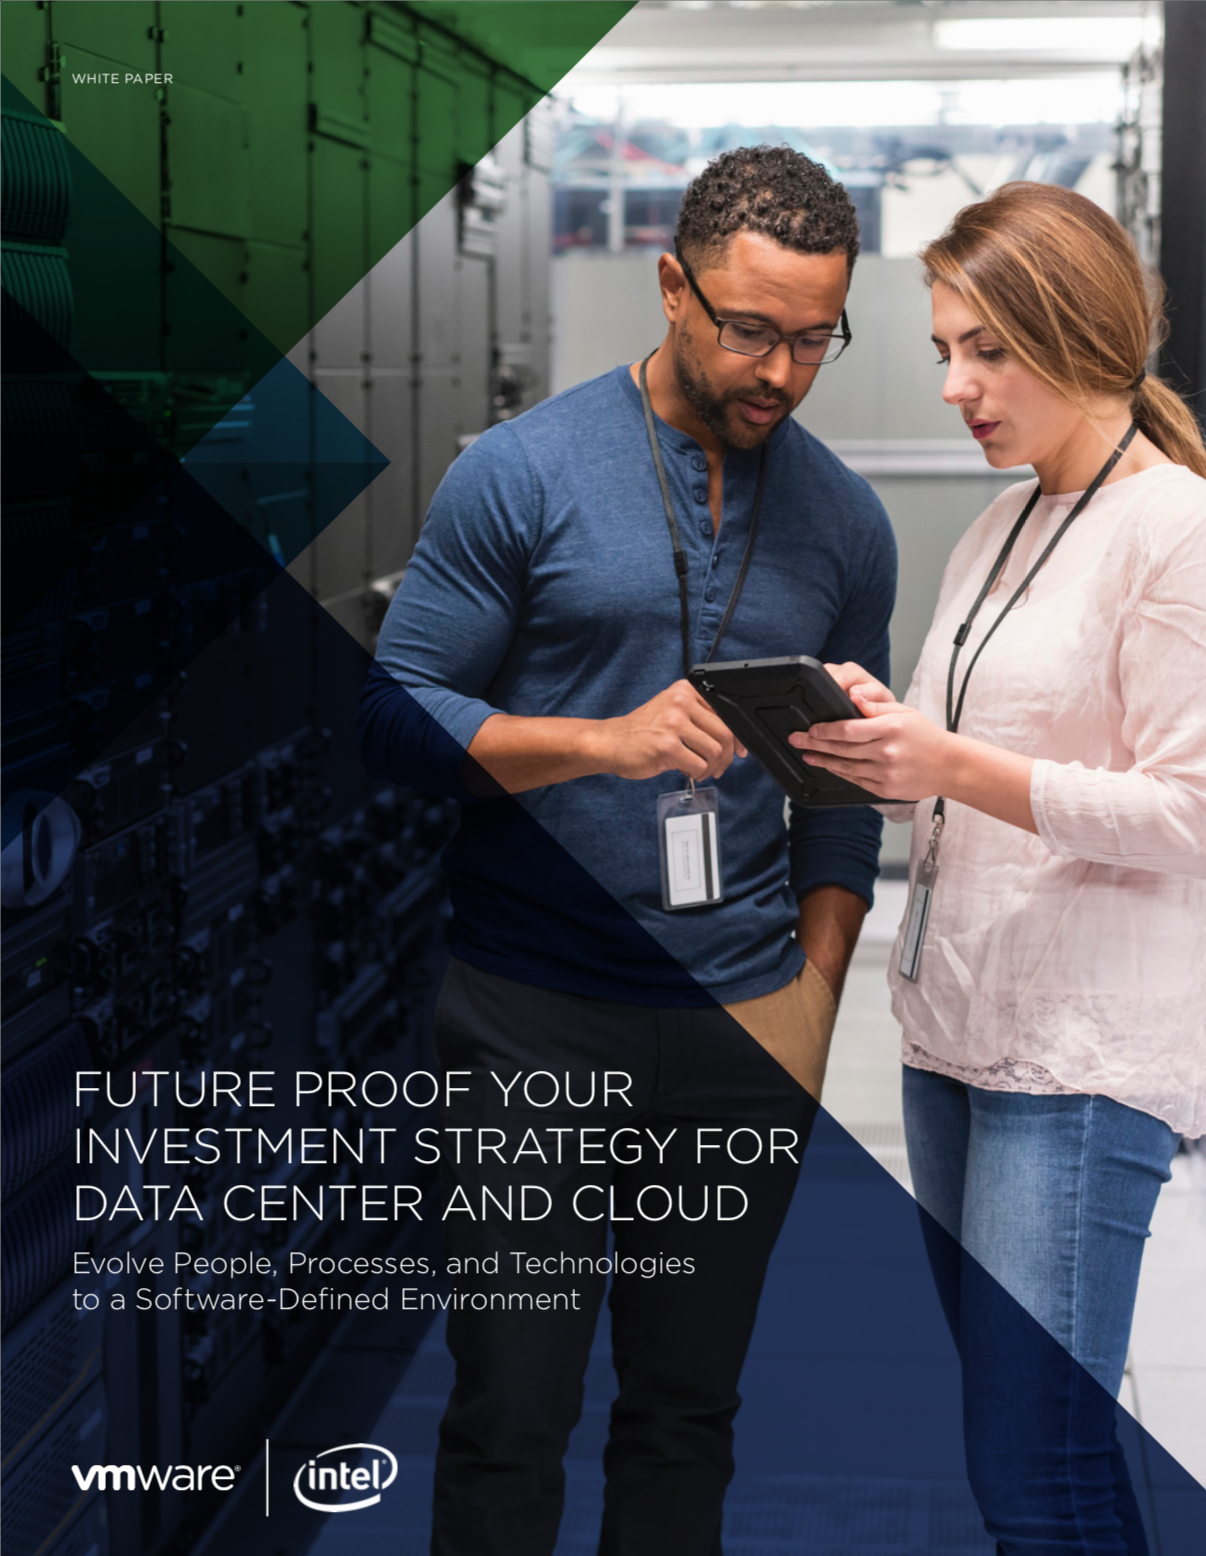 Future proof your investment strategy for data center and cloud